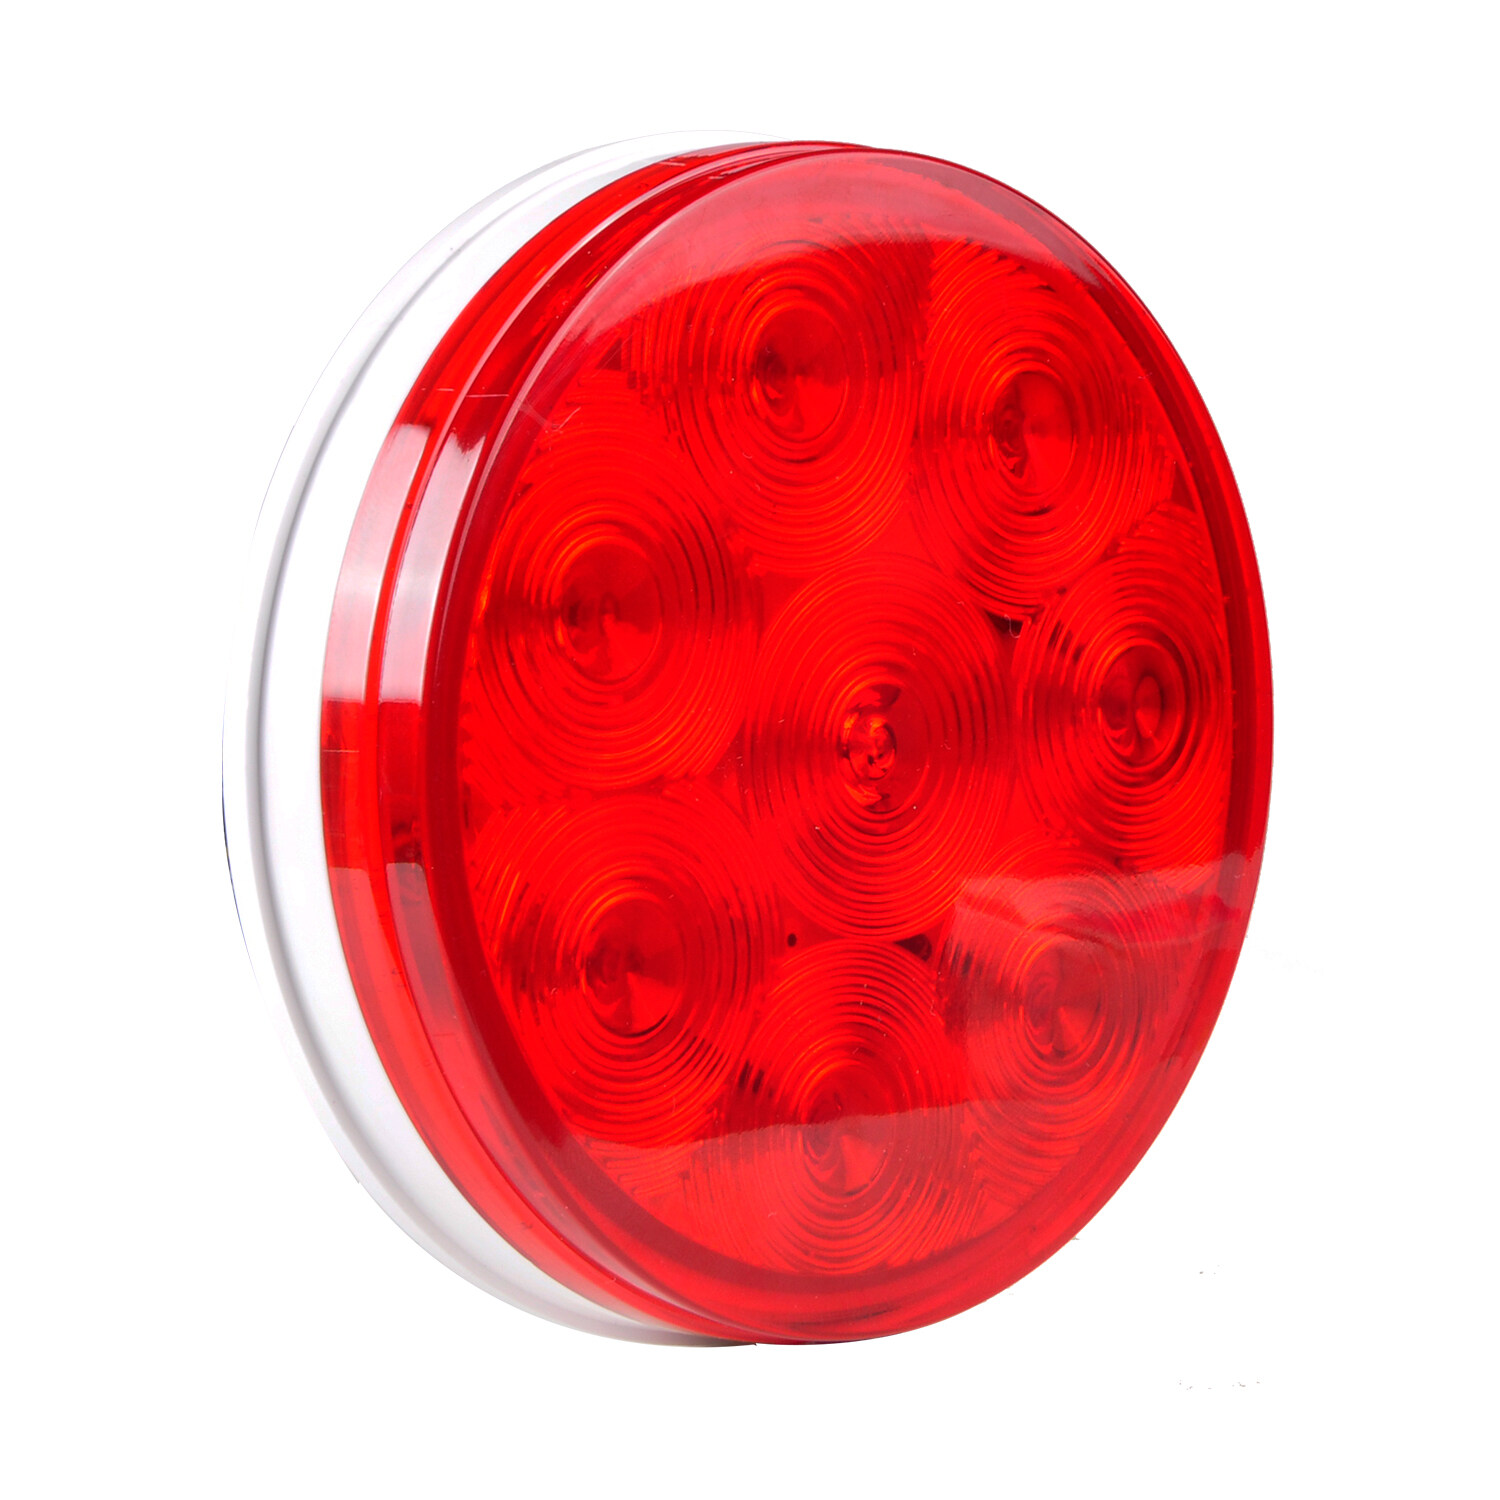 4 round led stop turn tail lights, 4 round stop tail turn light, led stop tail turn light strip, led stop tail turn lights, led stop turn tail backup lights